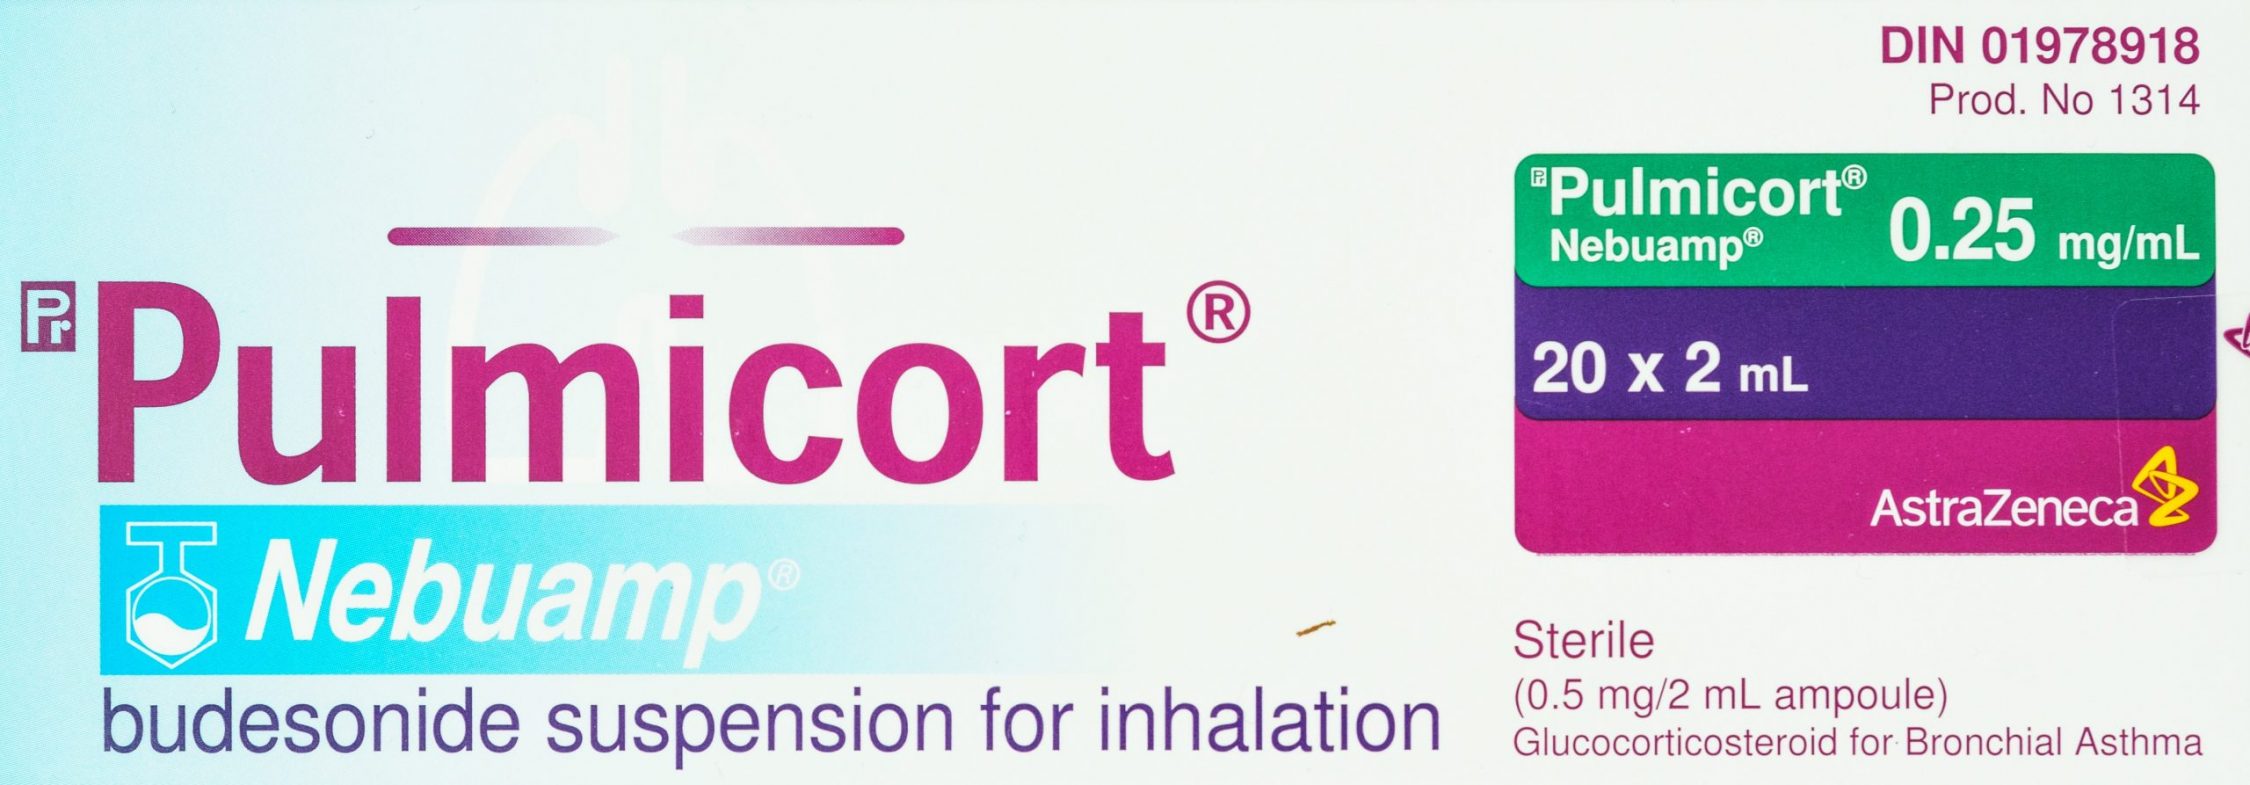 Pulmicort packaging. Budesonide suspension for inhilation. 0.25 mg/mL. 20 2mL ampoules.